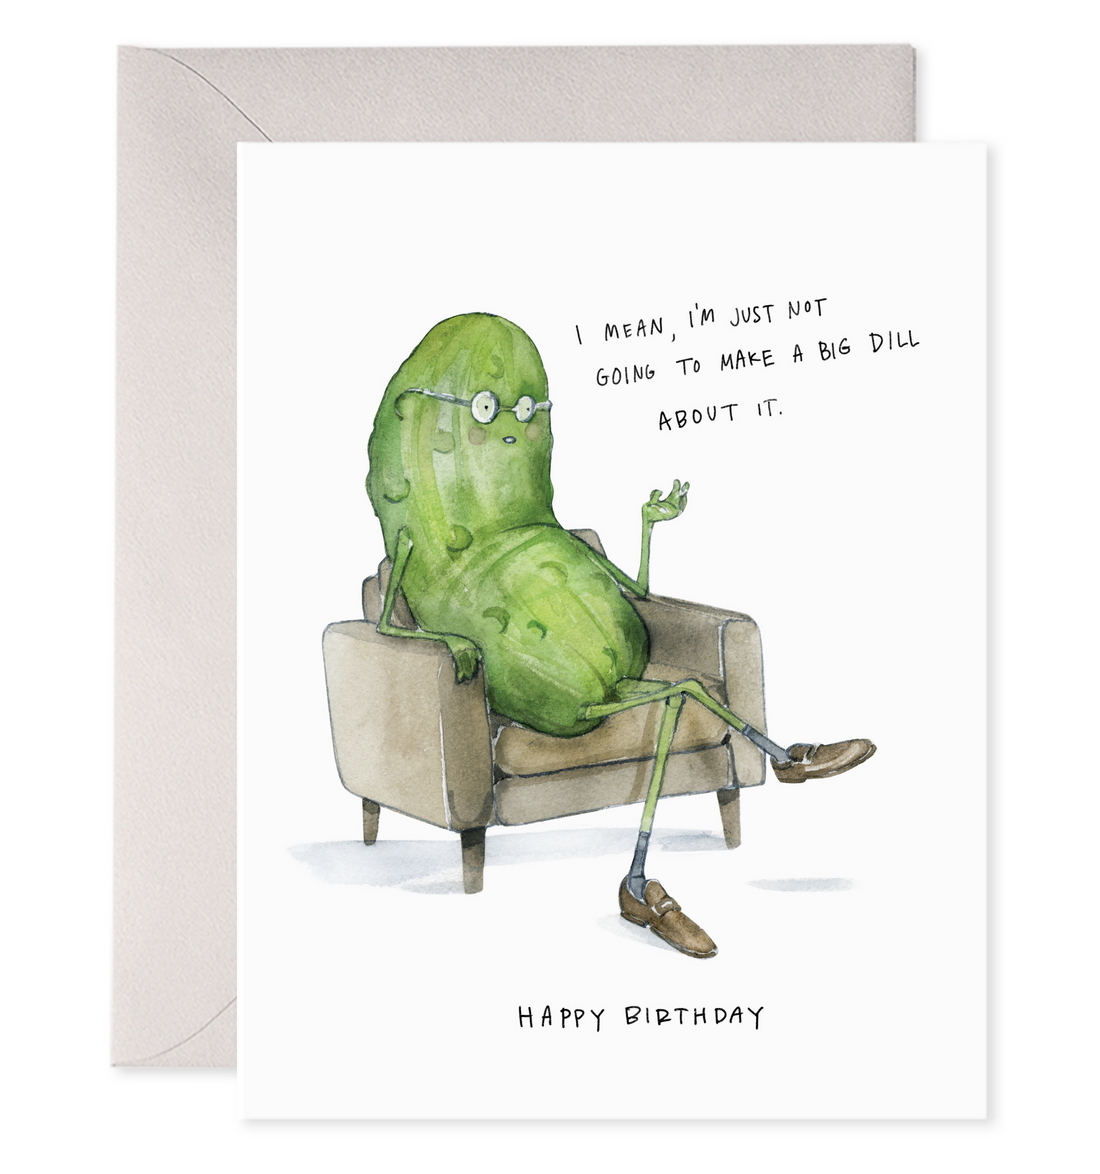 A Big Dill Card featuring an illustrated pickle character reclining on an armchair with a humorous statement, depicted in an original watercolor painting by E. Frances.